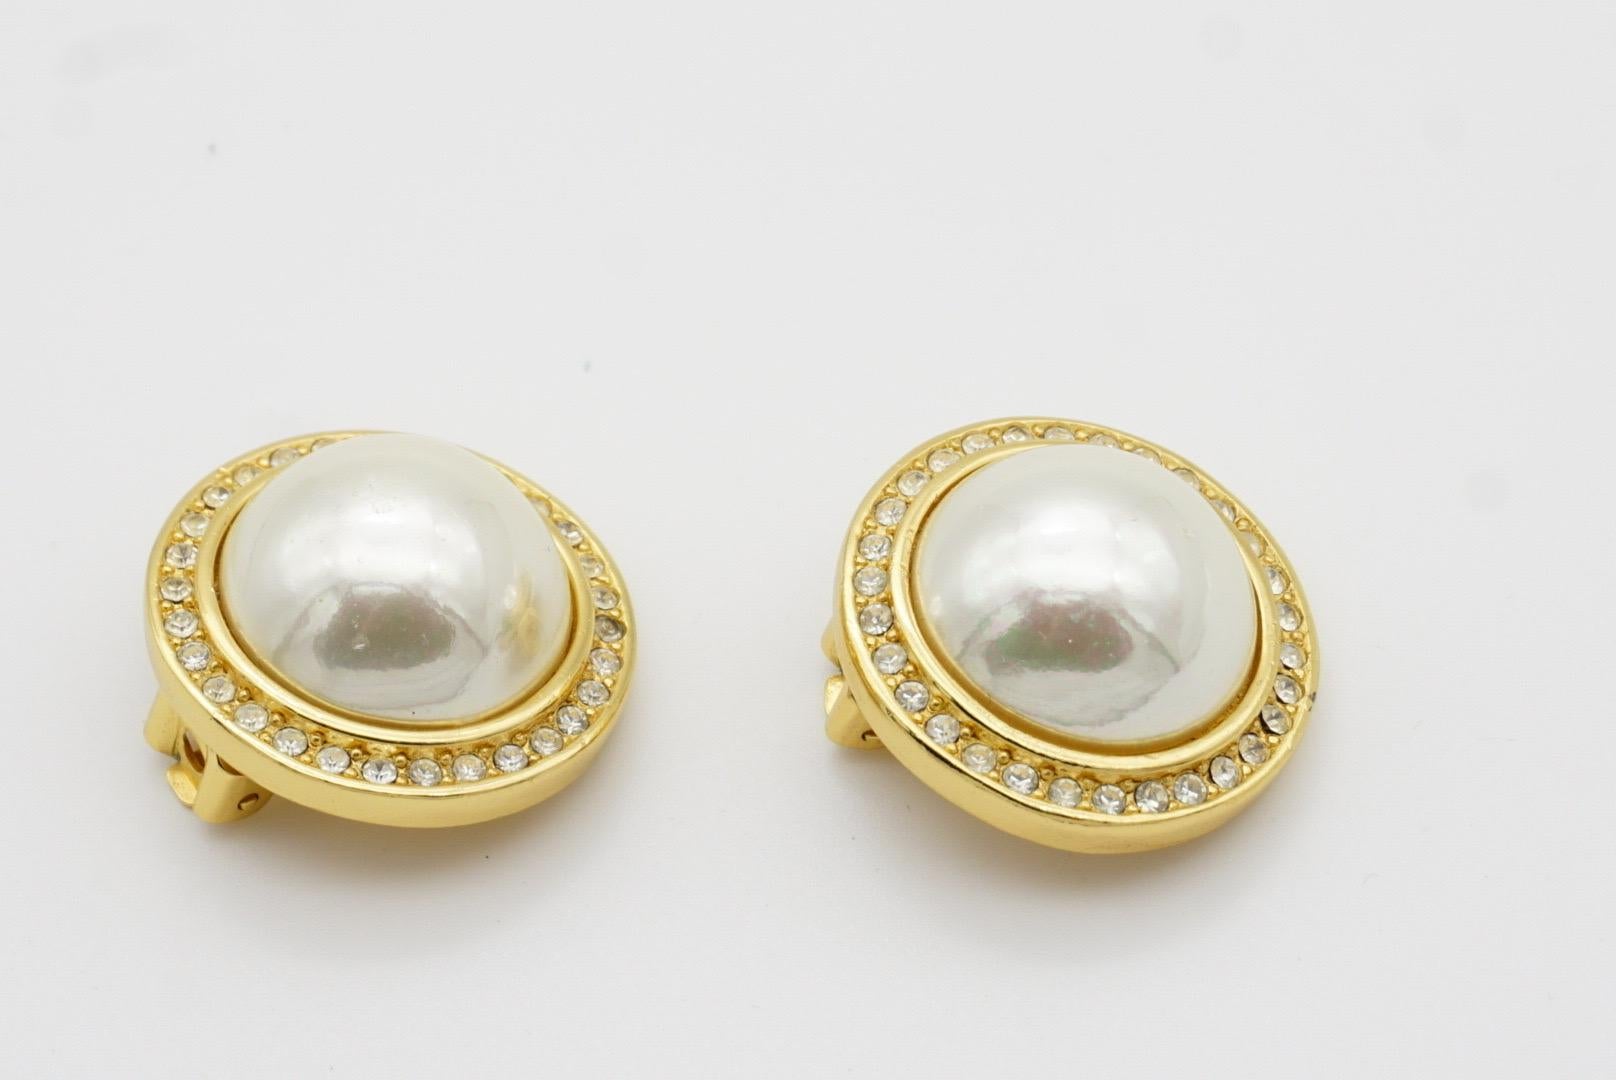 Christian Dior GROSSE 1990 CHC Large Round White Pearl Crystals Clip Earrings For Sale 6